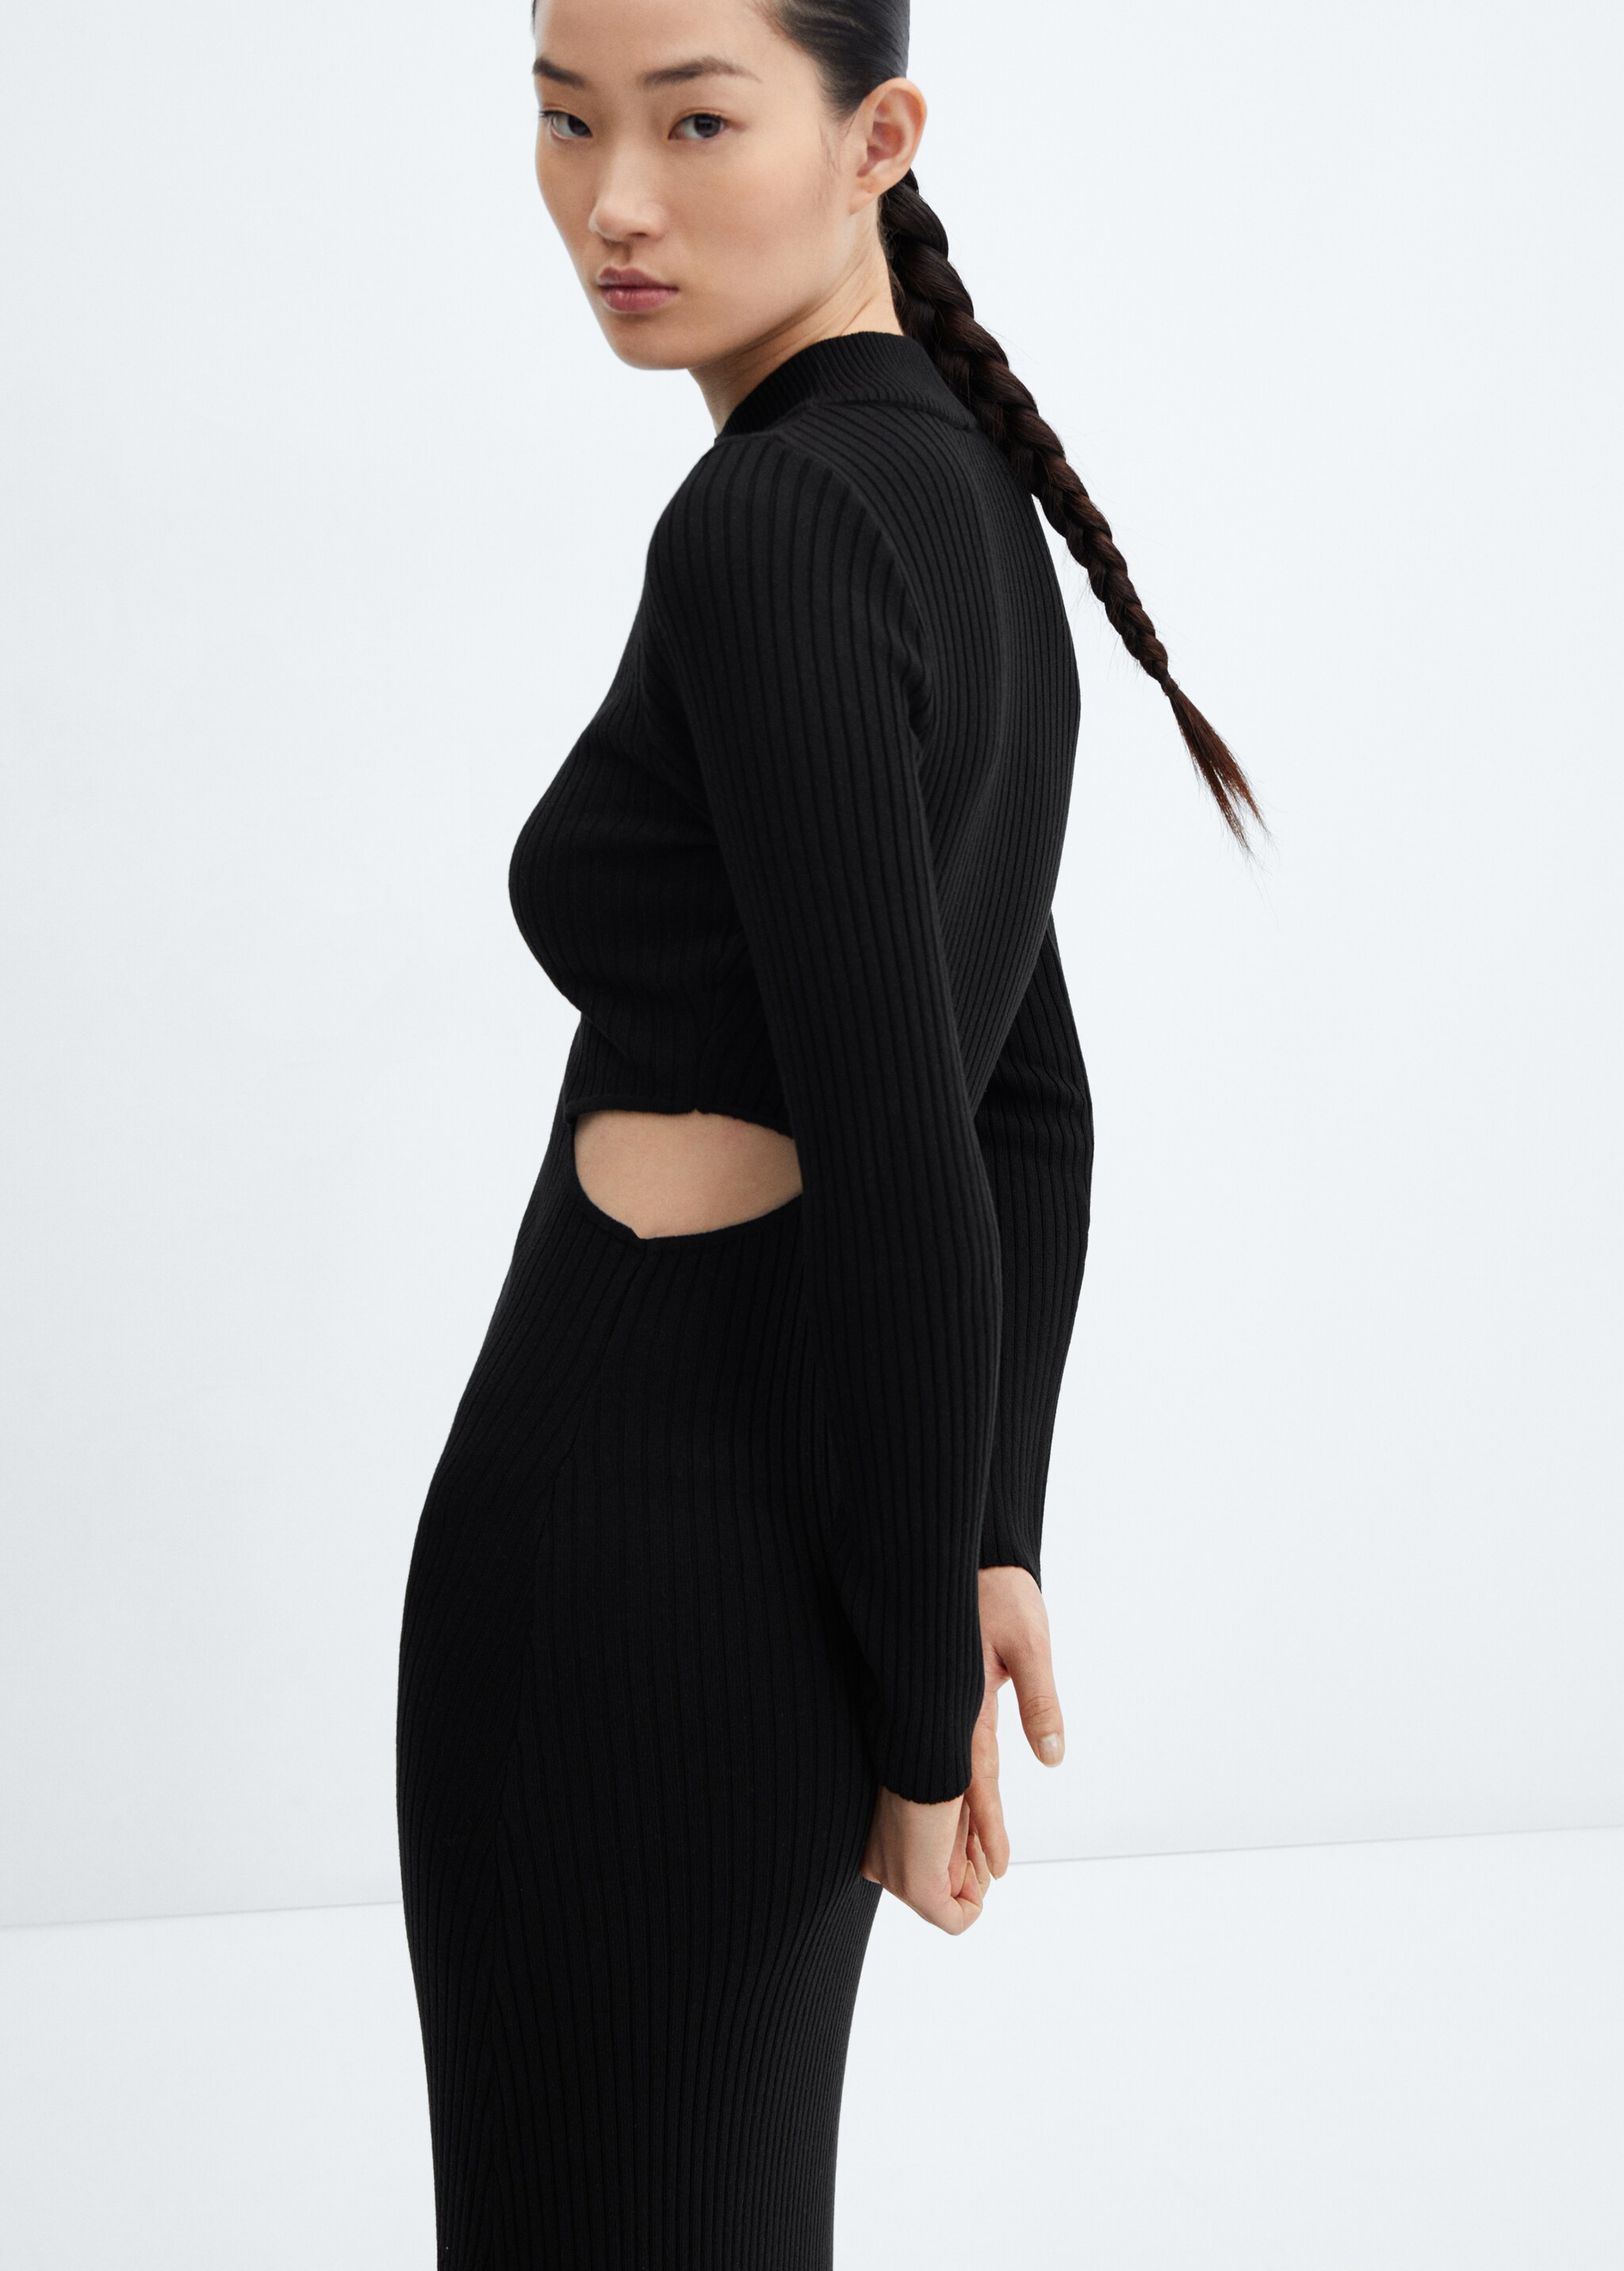 Rib-knit dress with slits - Details of the article 6